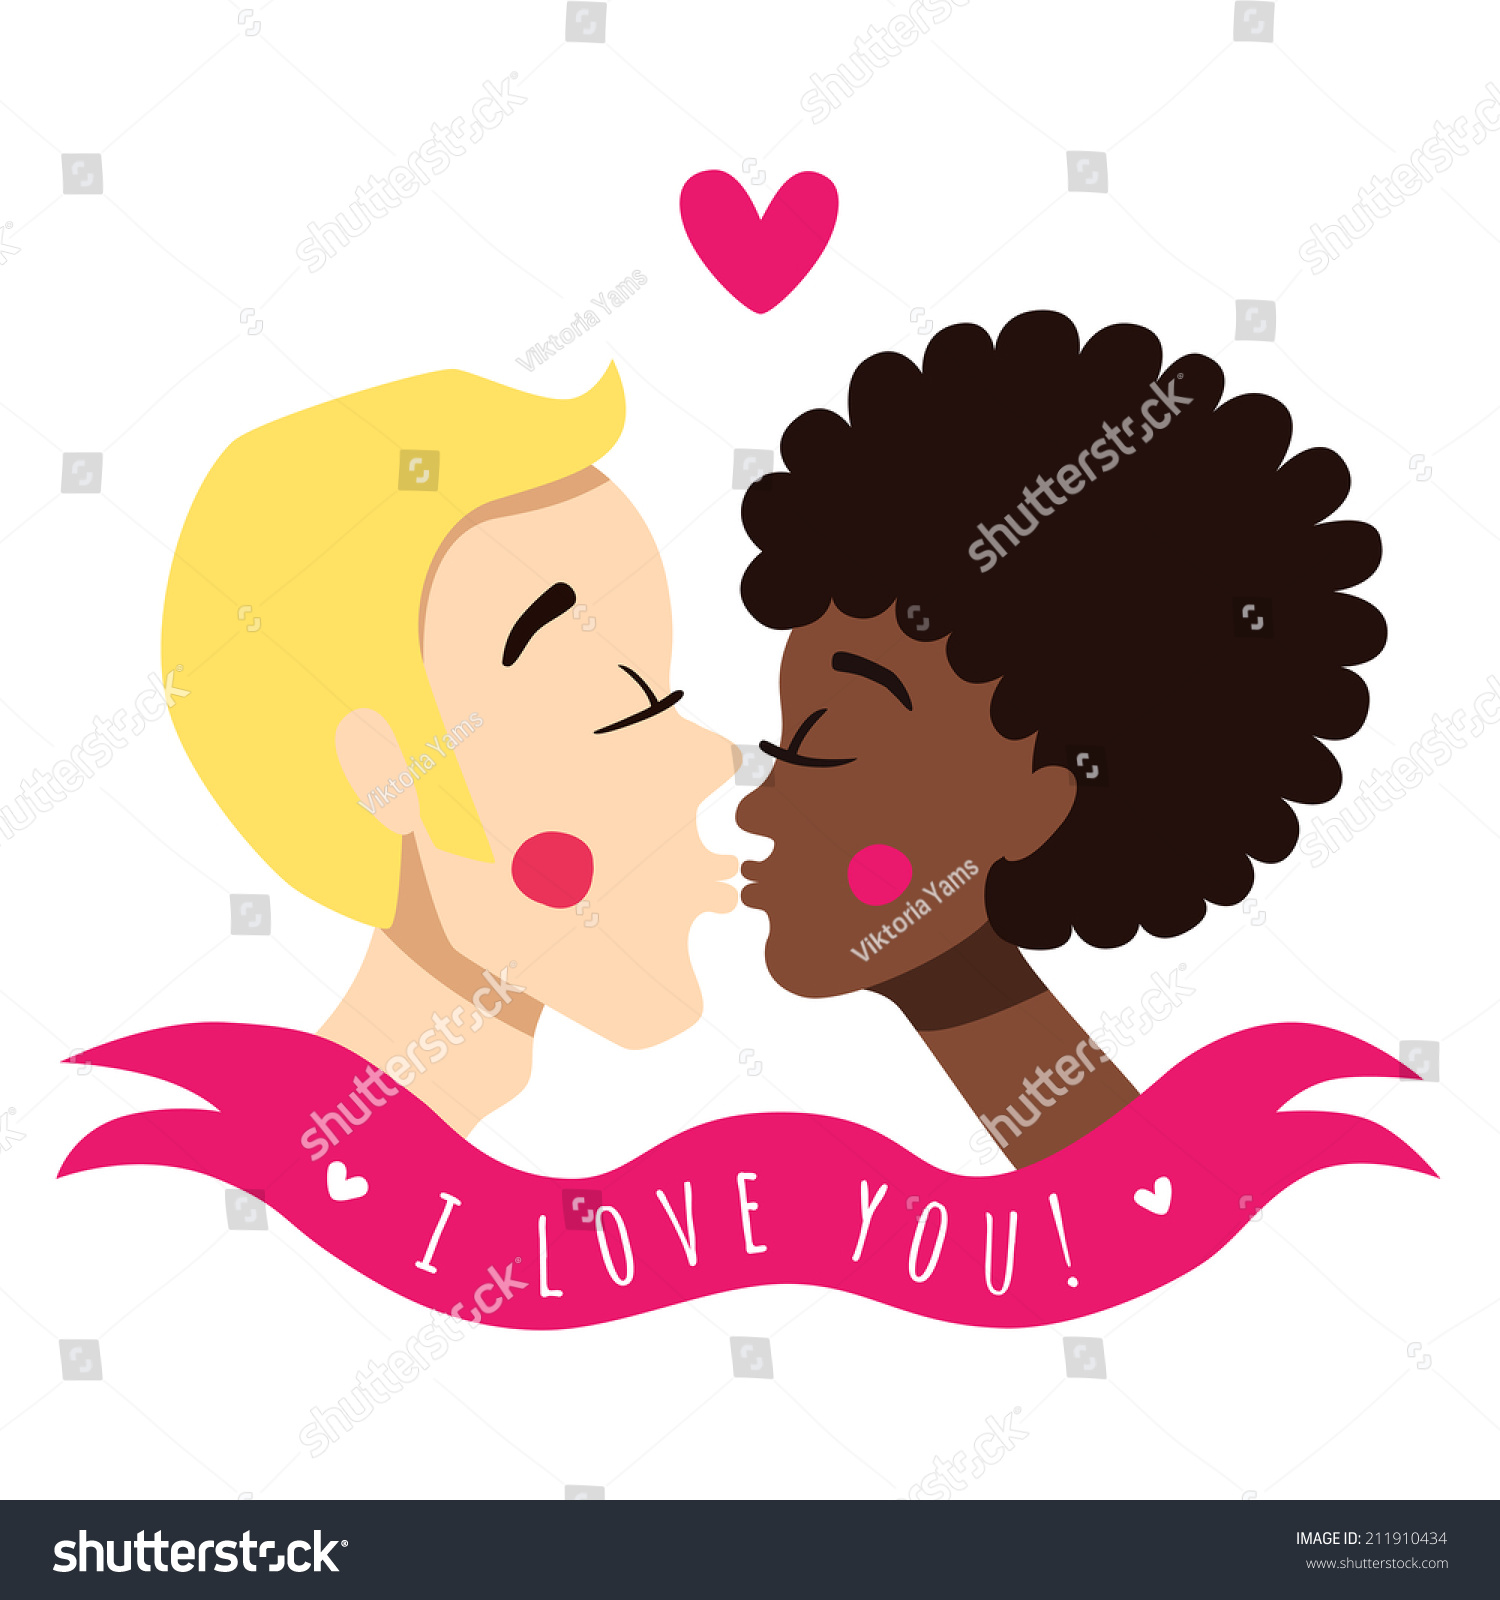 Love You Card Background Kissing Couple Stock Vector 211910434